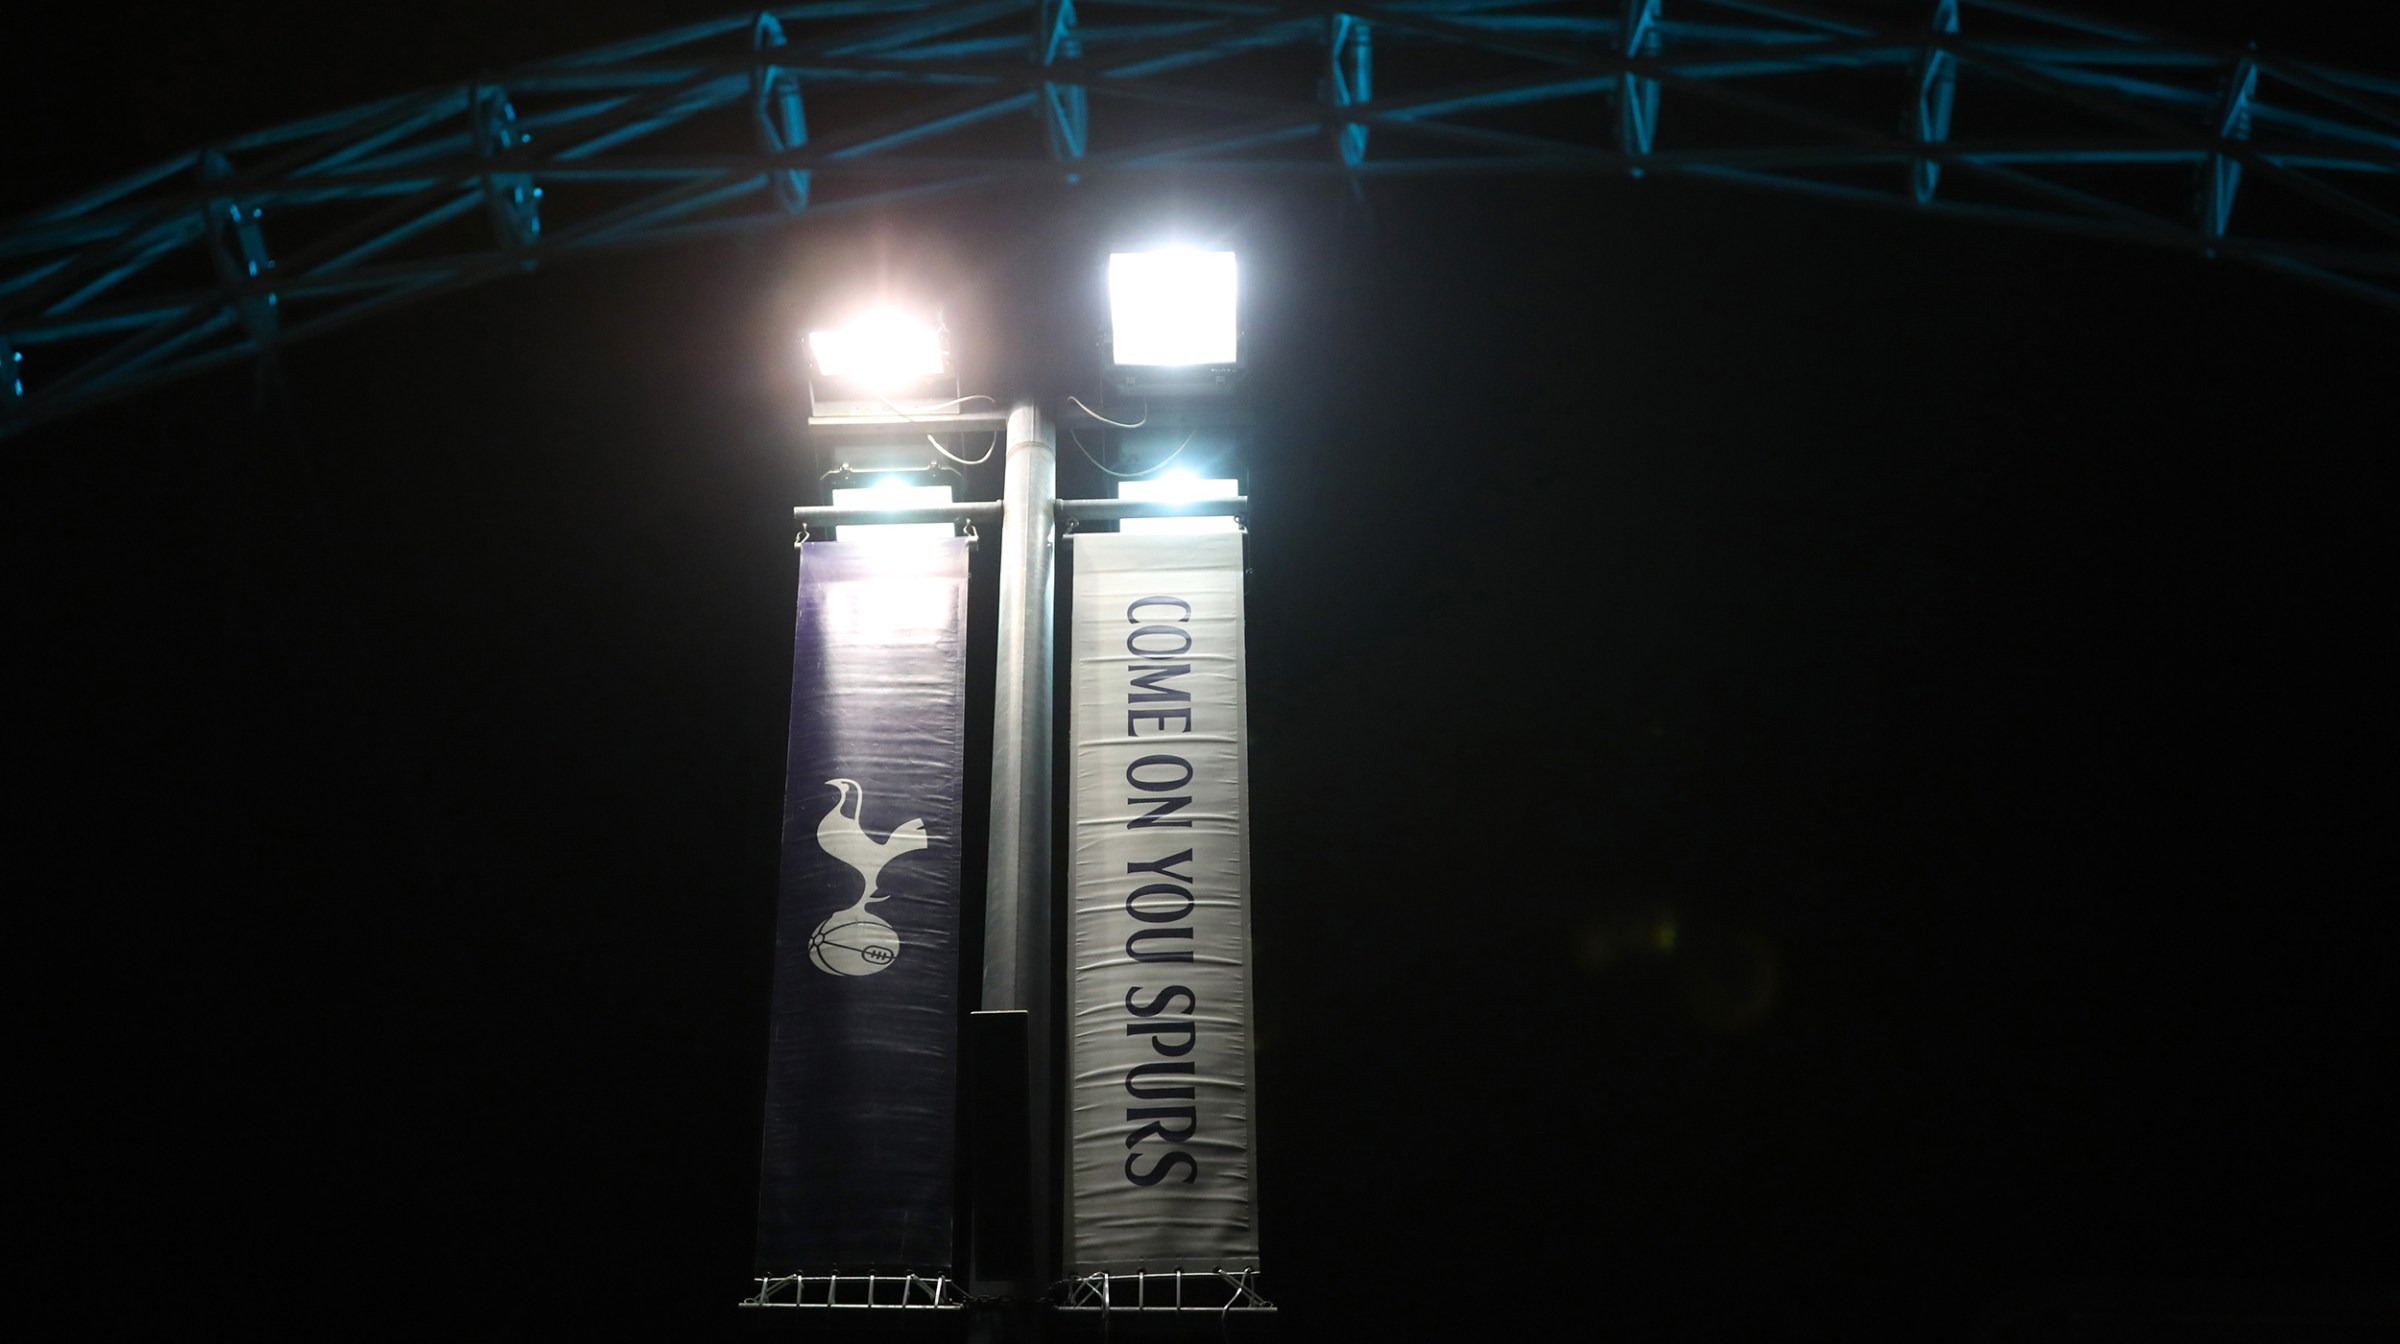 General view of a Tottenham sign under the arch outside the stadium before the Premier League match between Tottenham Hotspur and Watford FC at Wembley Stadium on January 30, 2019 in London, United Kingdom.